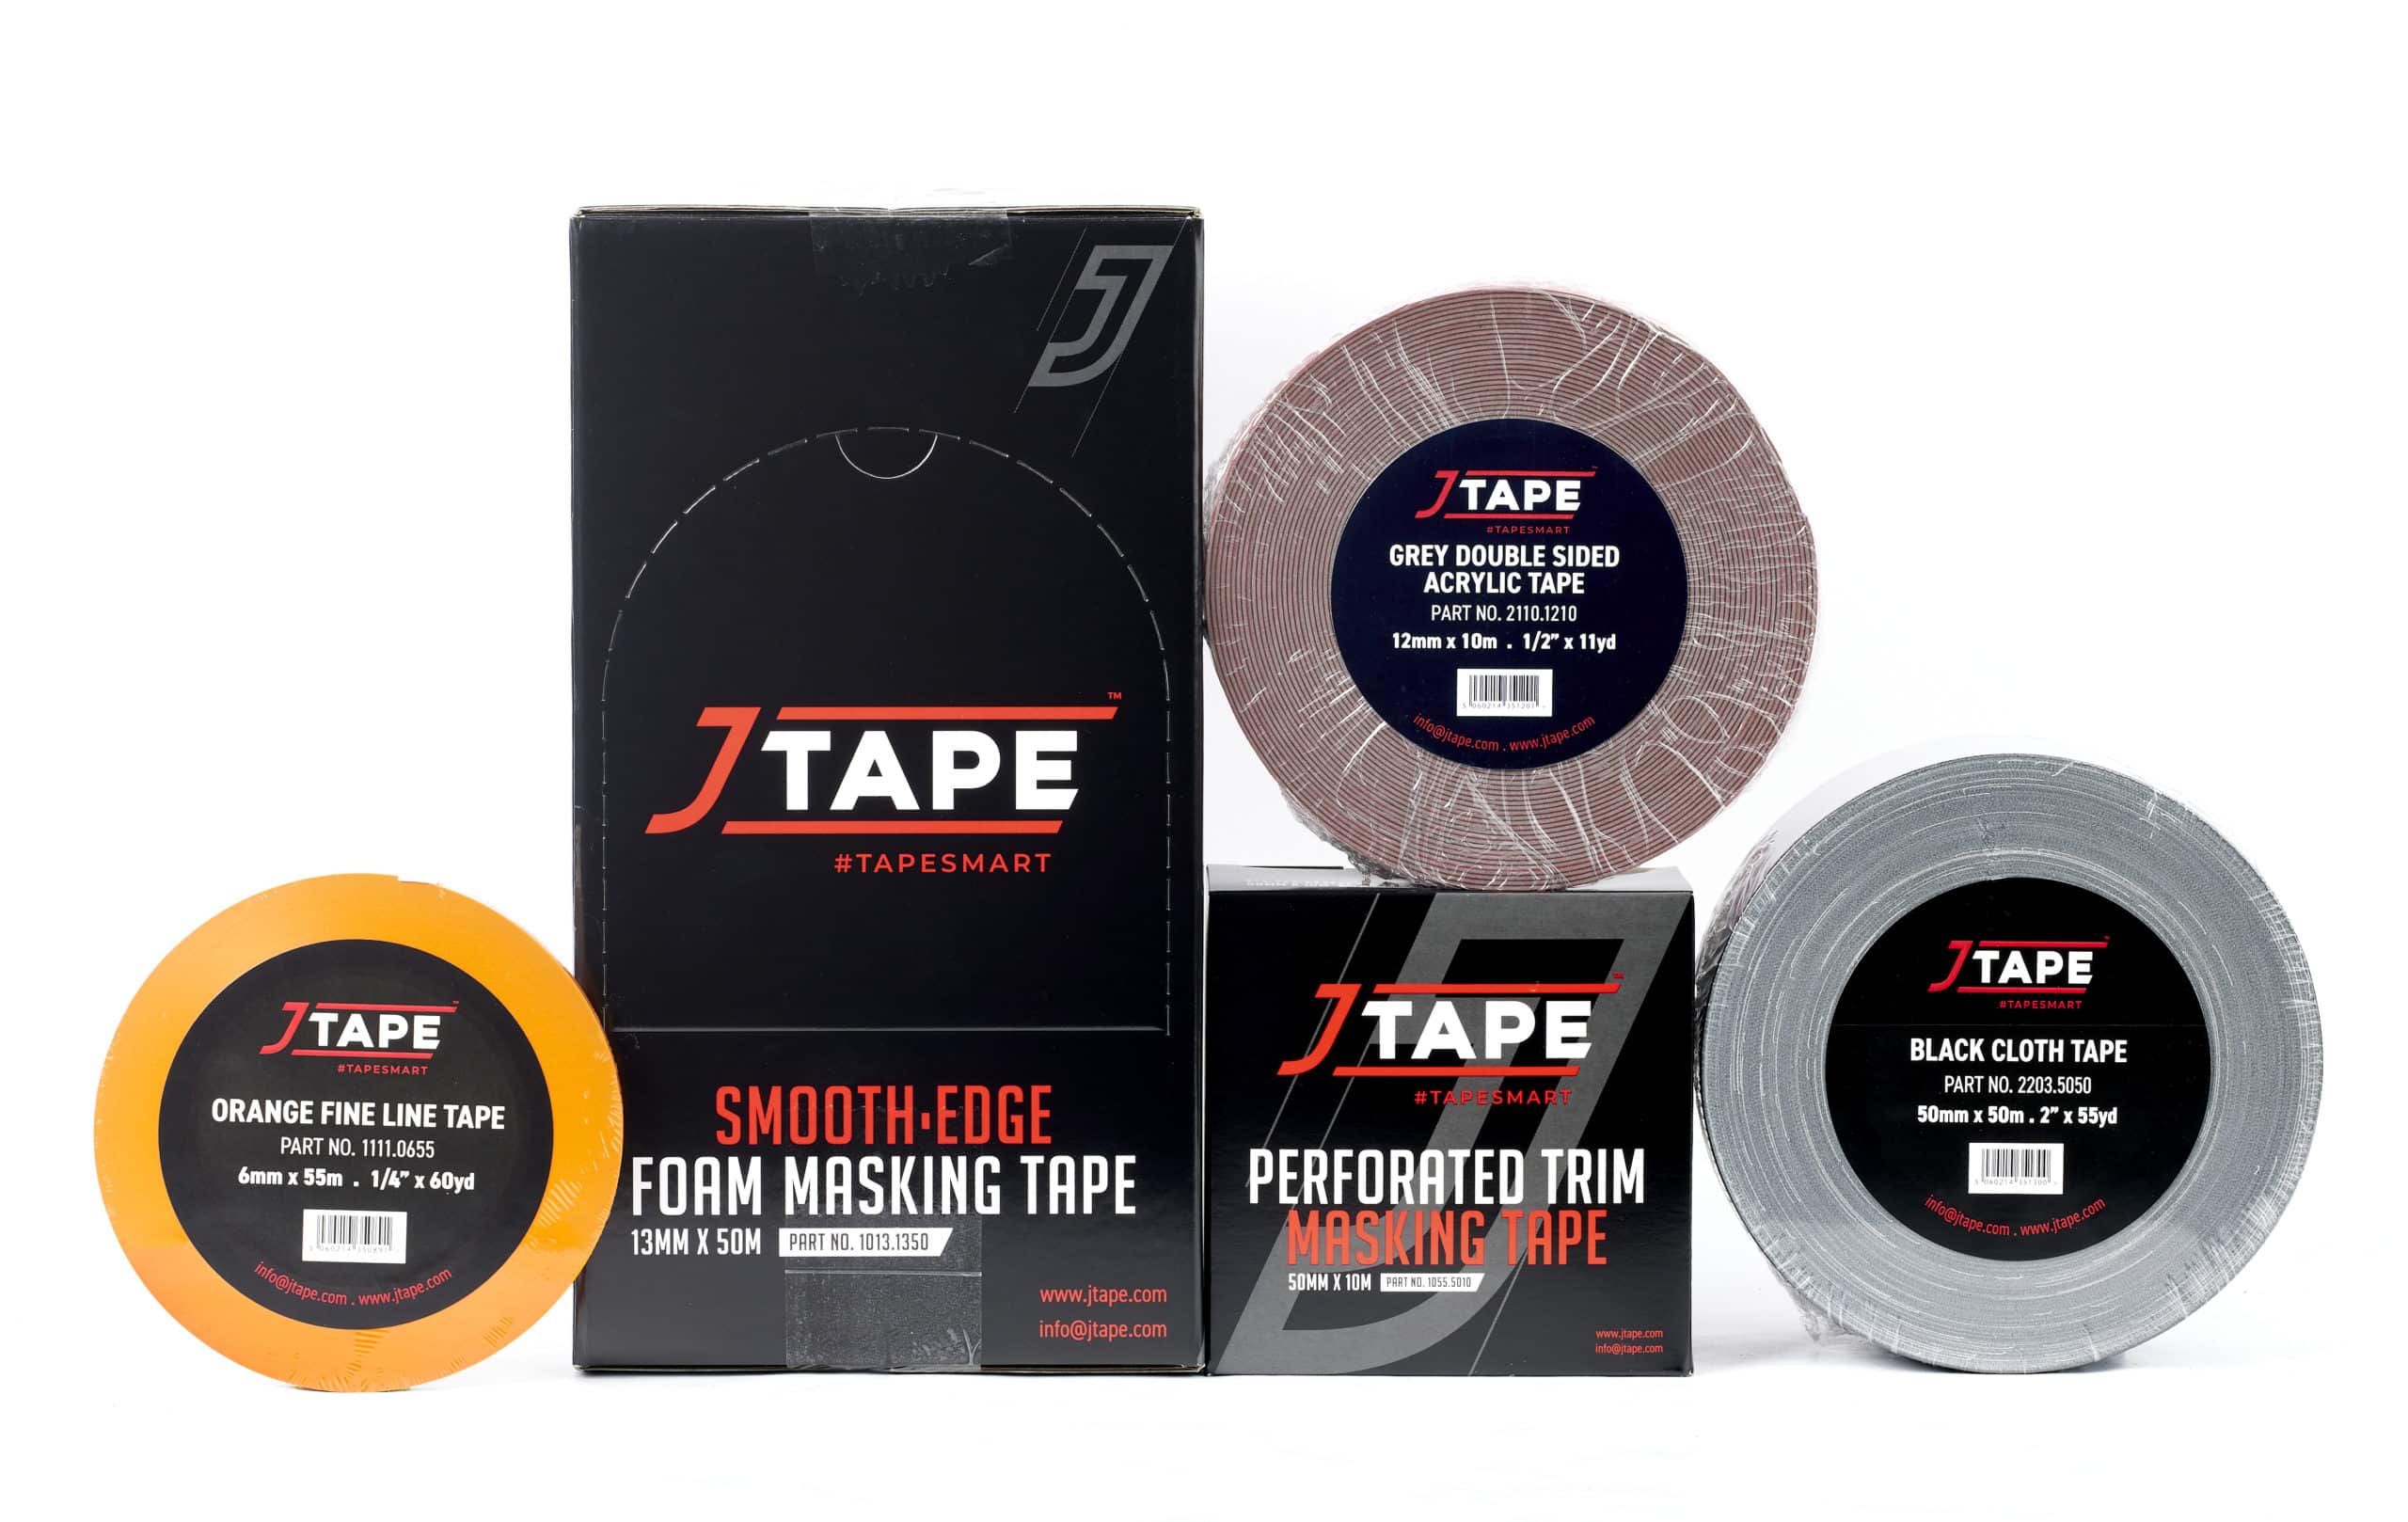 JTAPE products